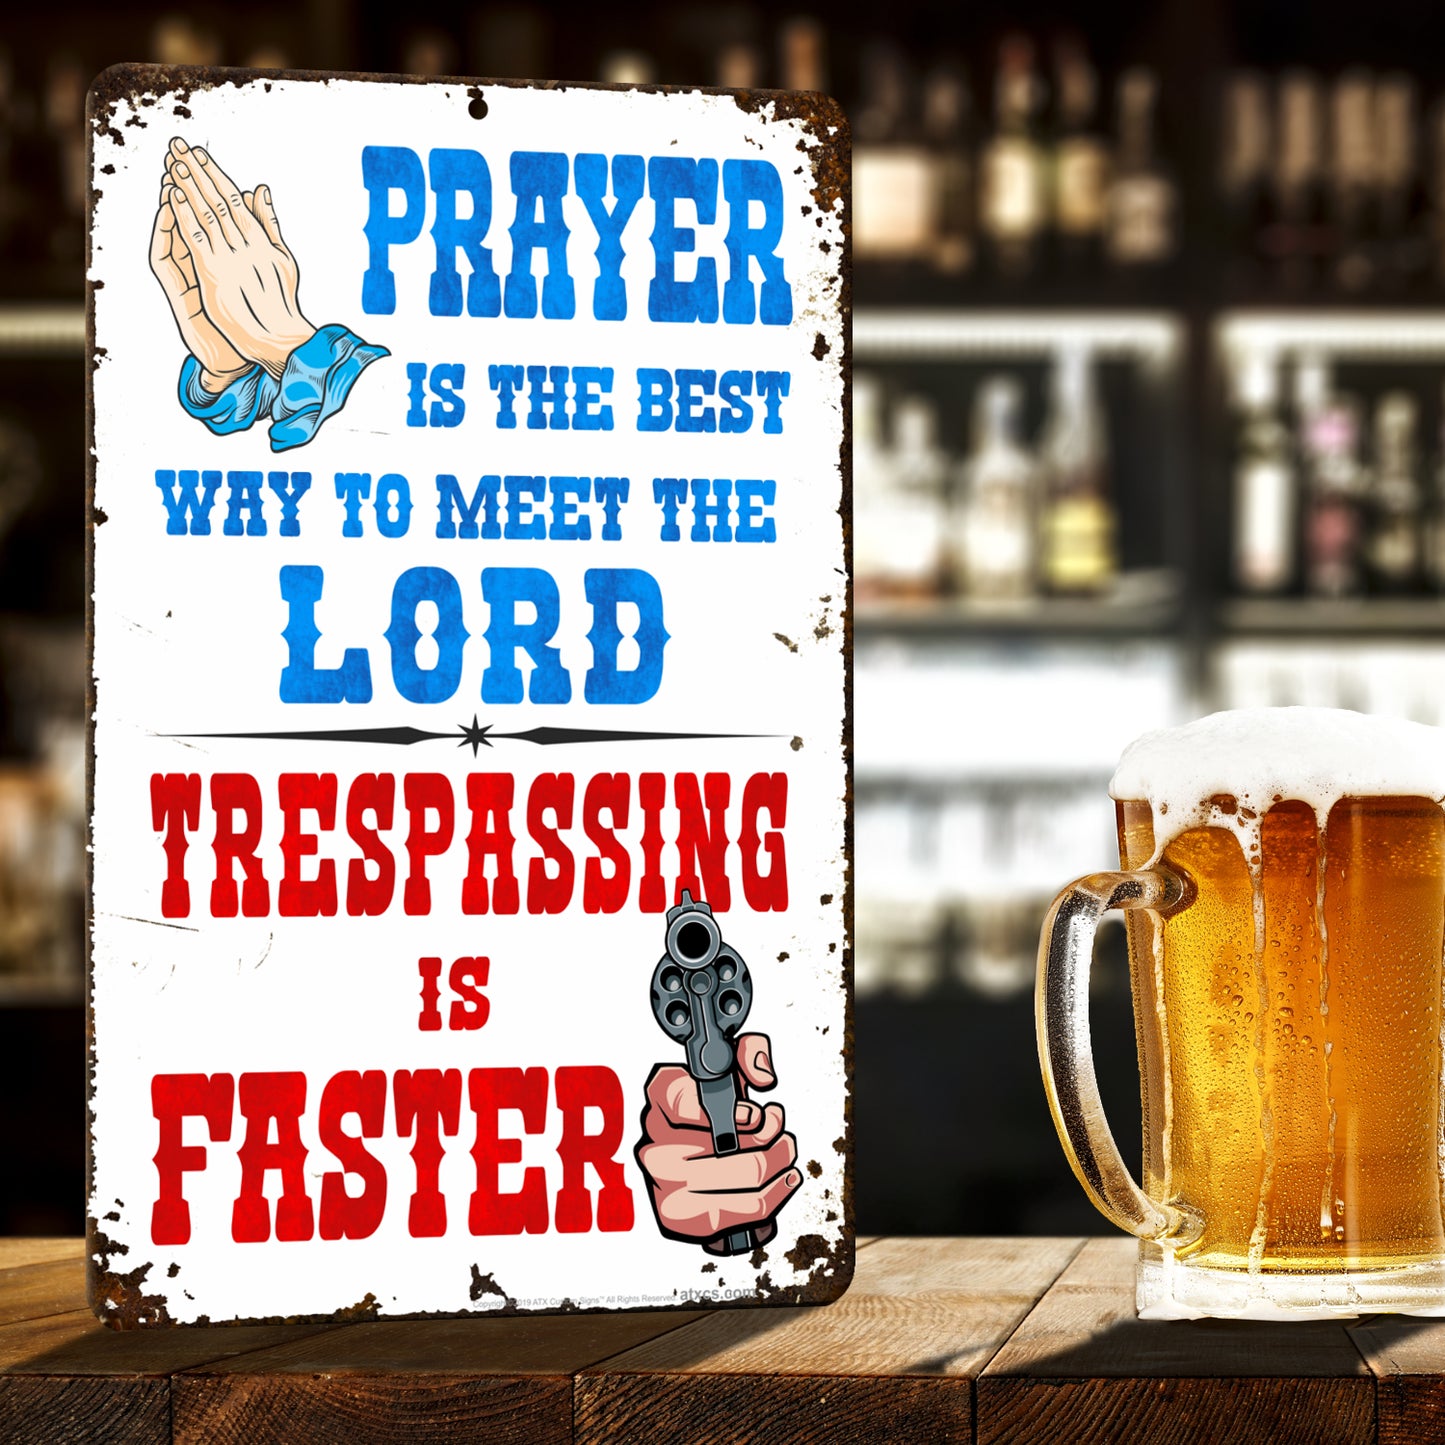 Funny No Trespassing Sign, Prayer is The Best Way to Meet The Lord. Trespassing is Faster Sign Rustic Decor Design - Size 8 x 12